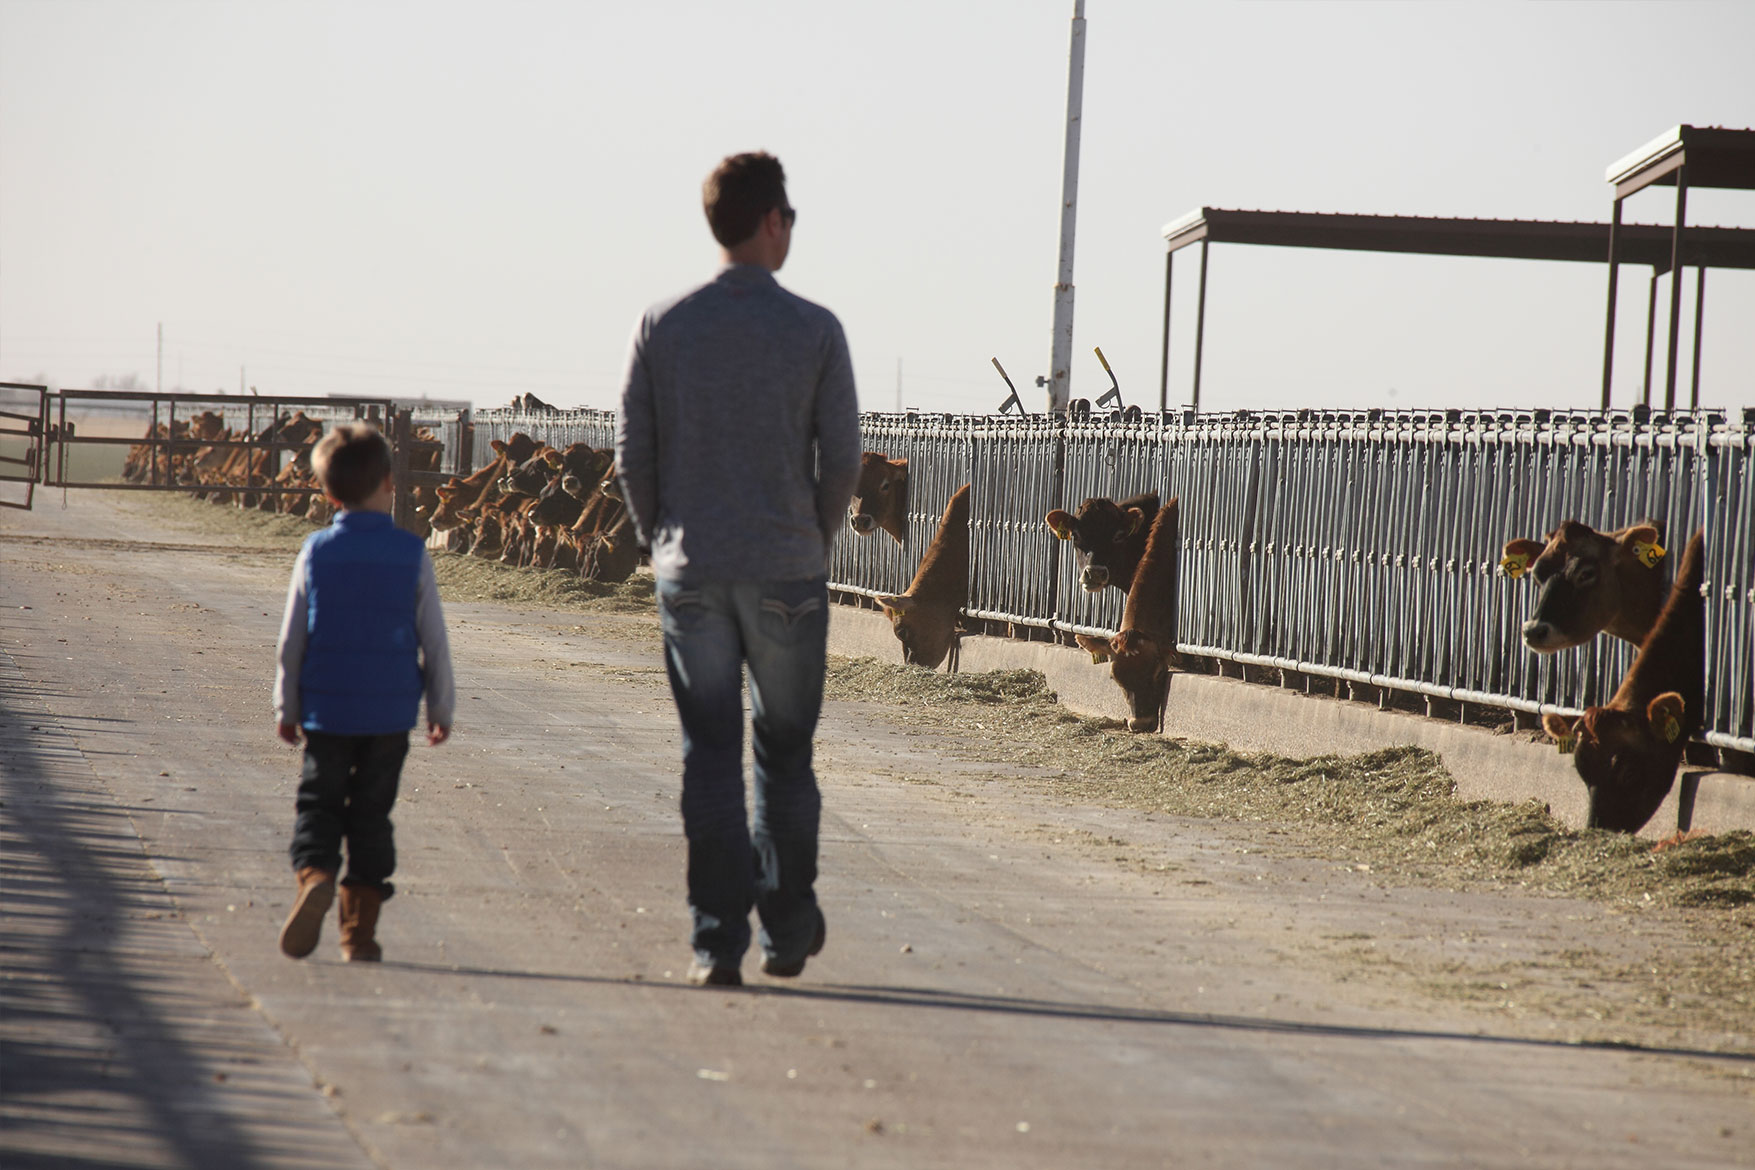 Father and son checking on the herd.